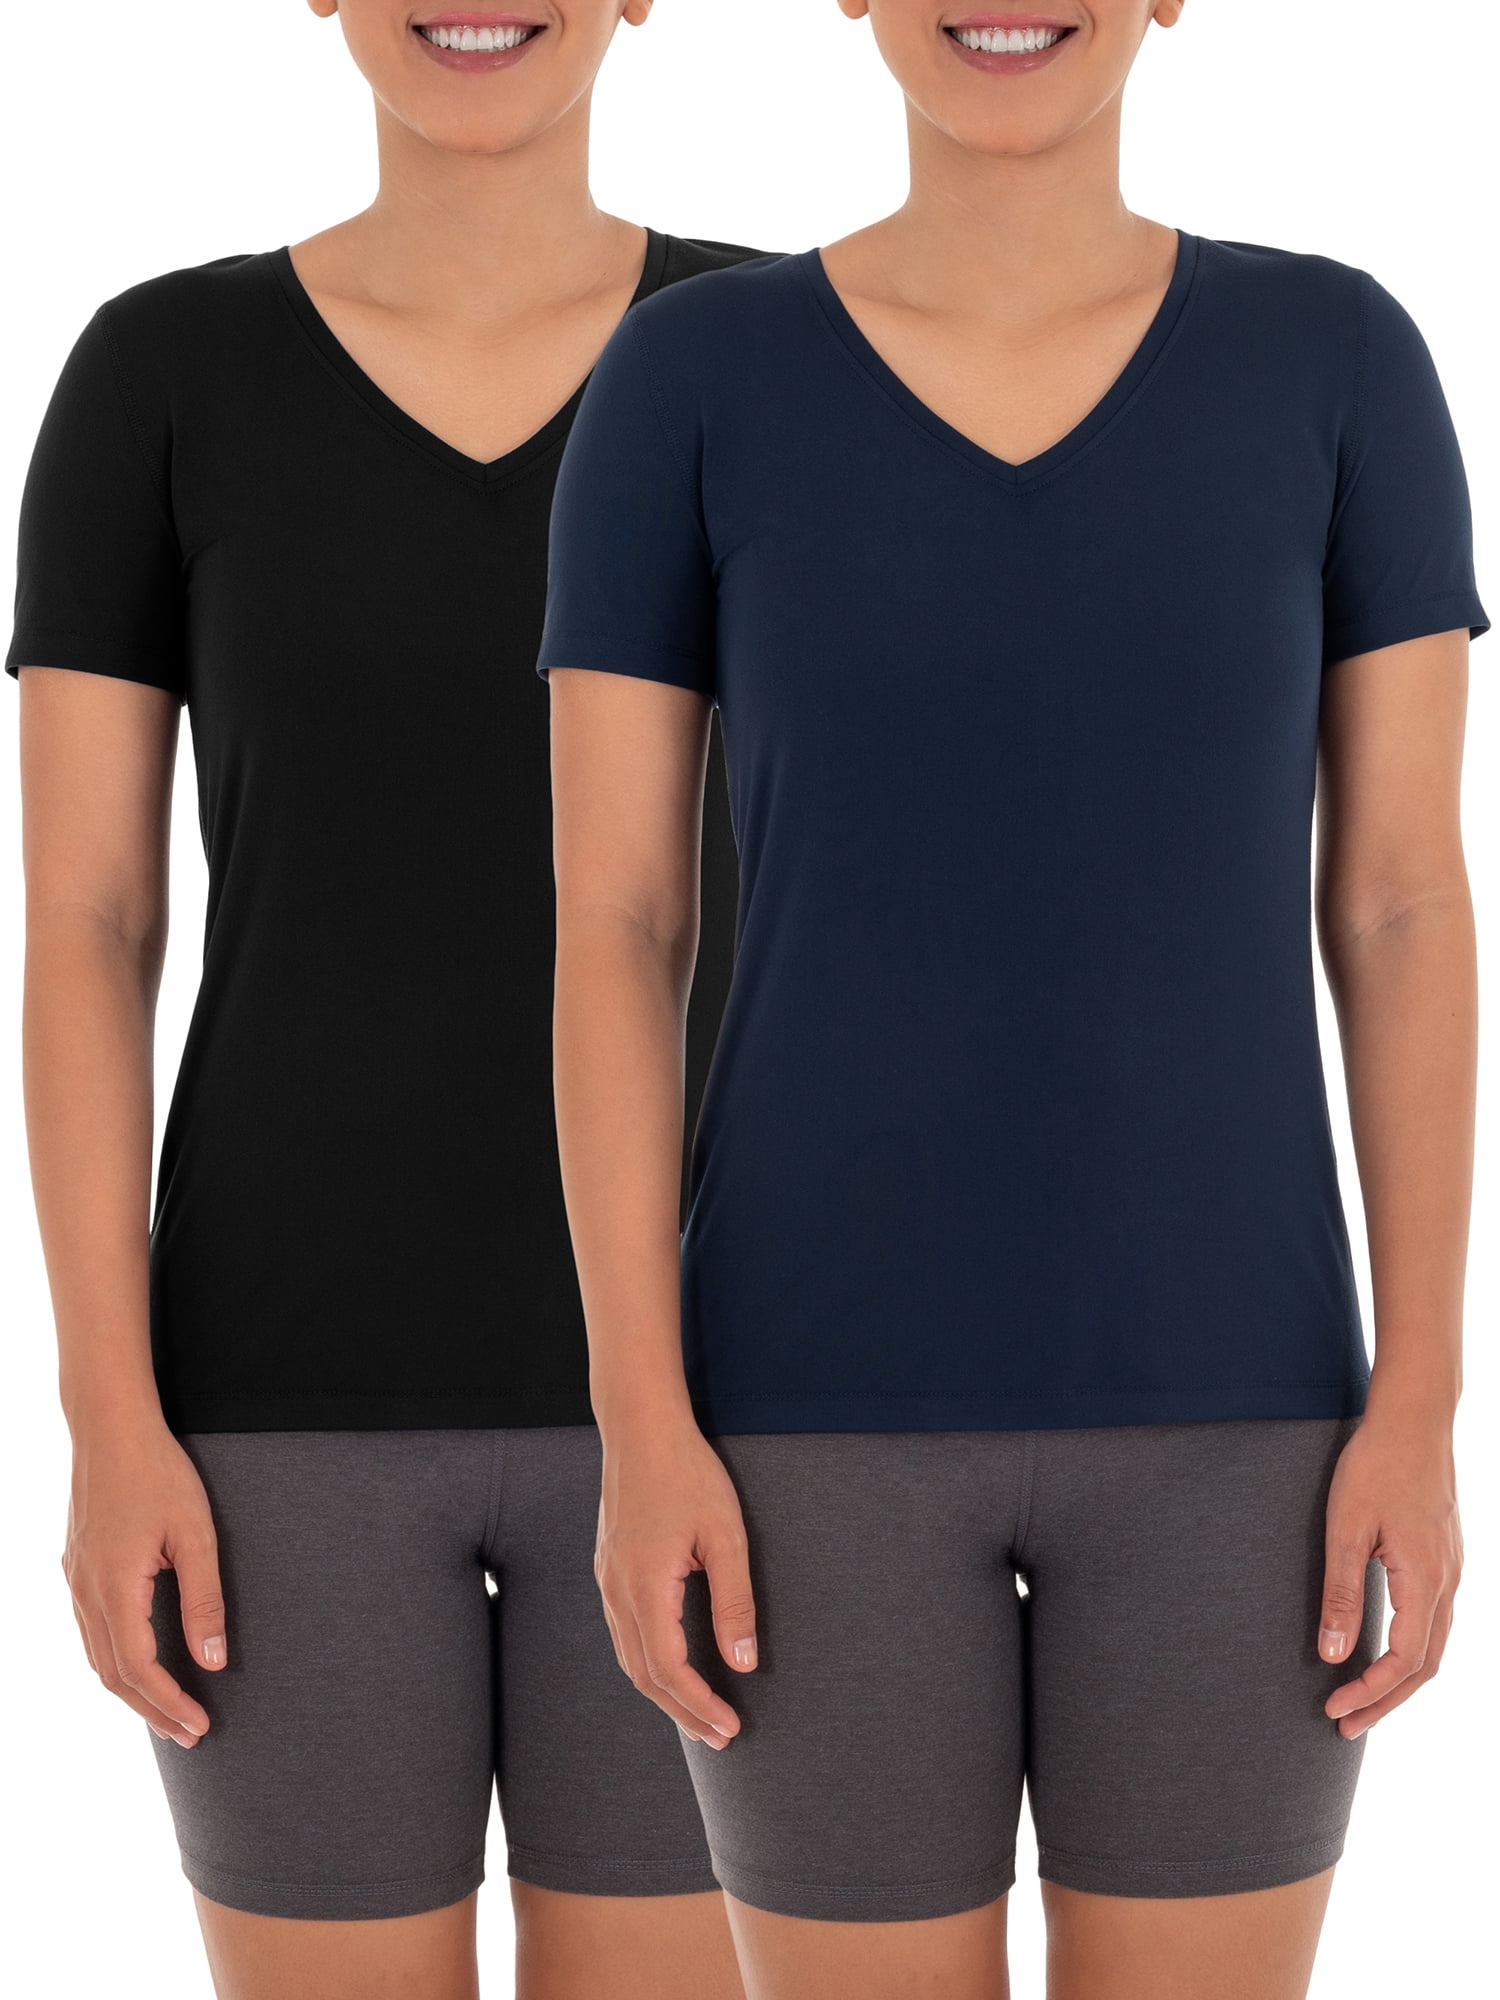 BLUE L NEW Kirkland Women's Semi-fitted V-neck Active Tee XL M 